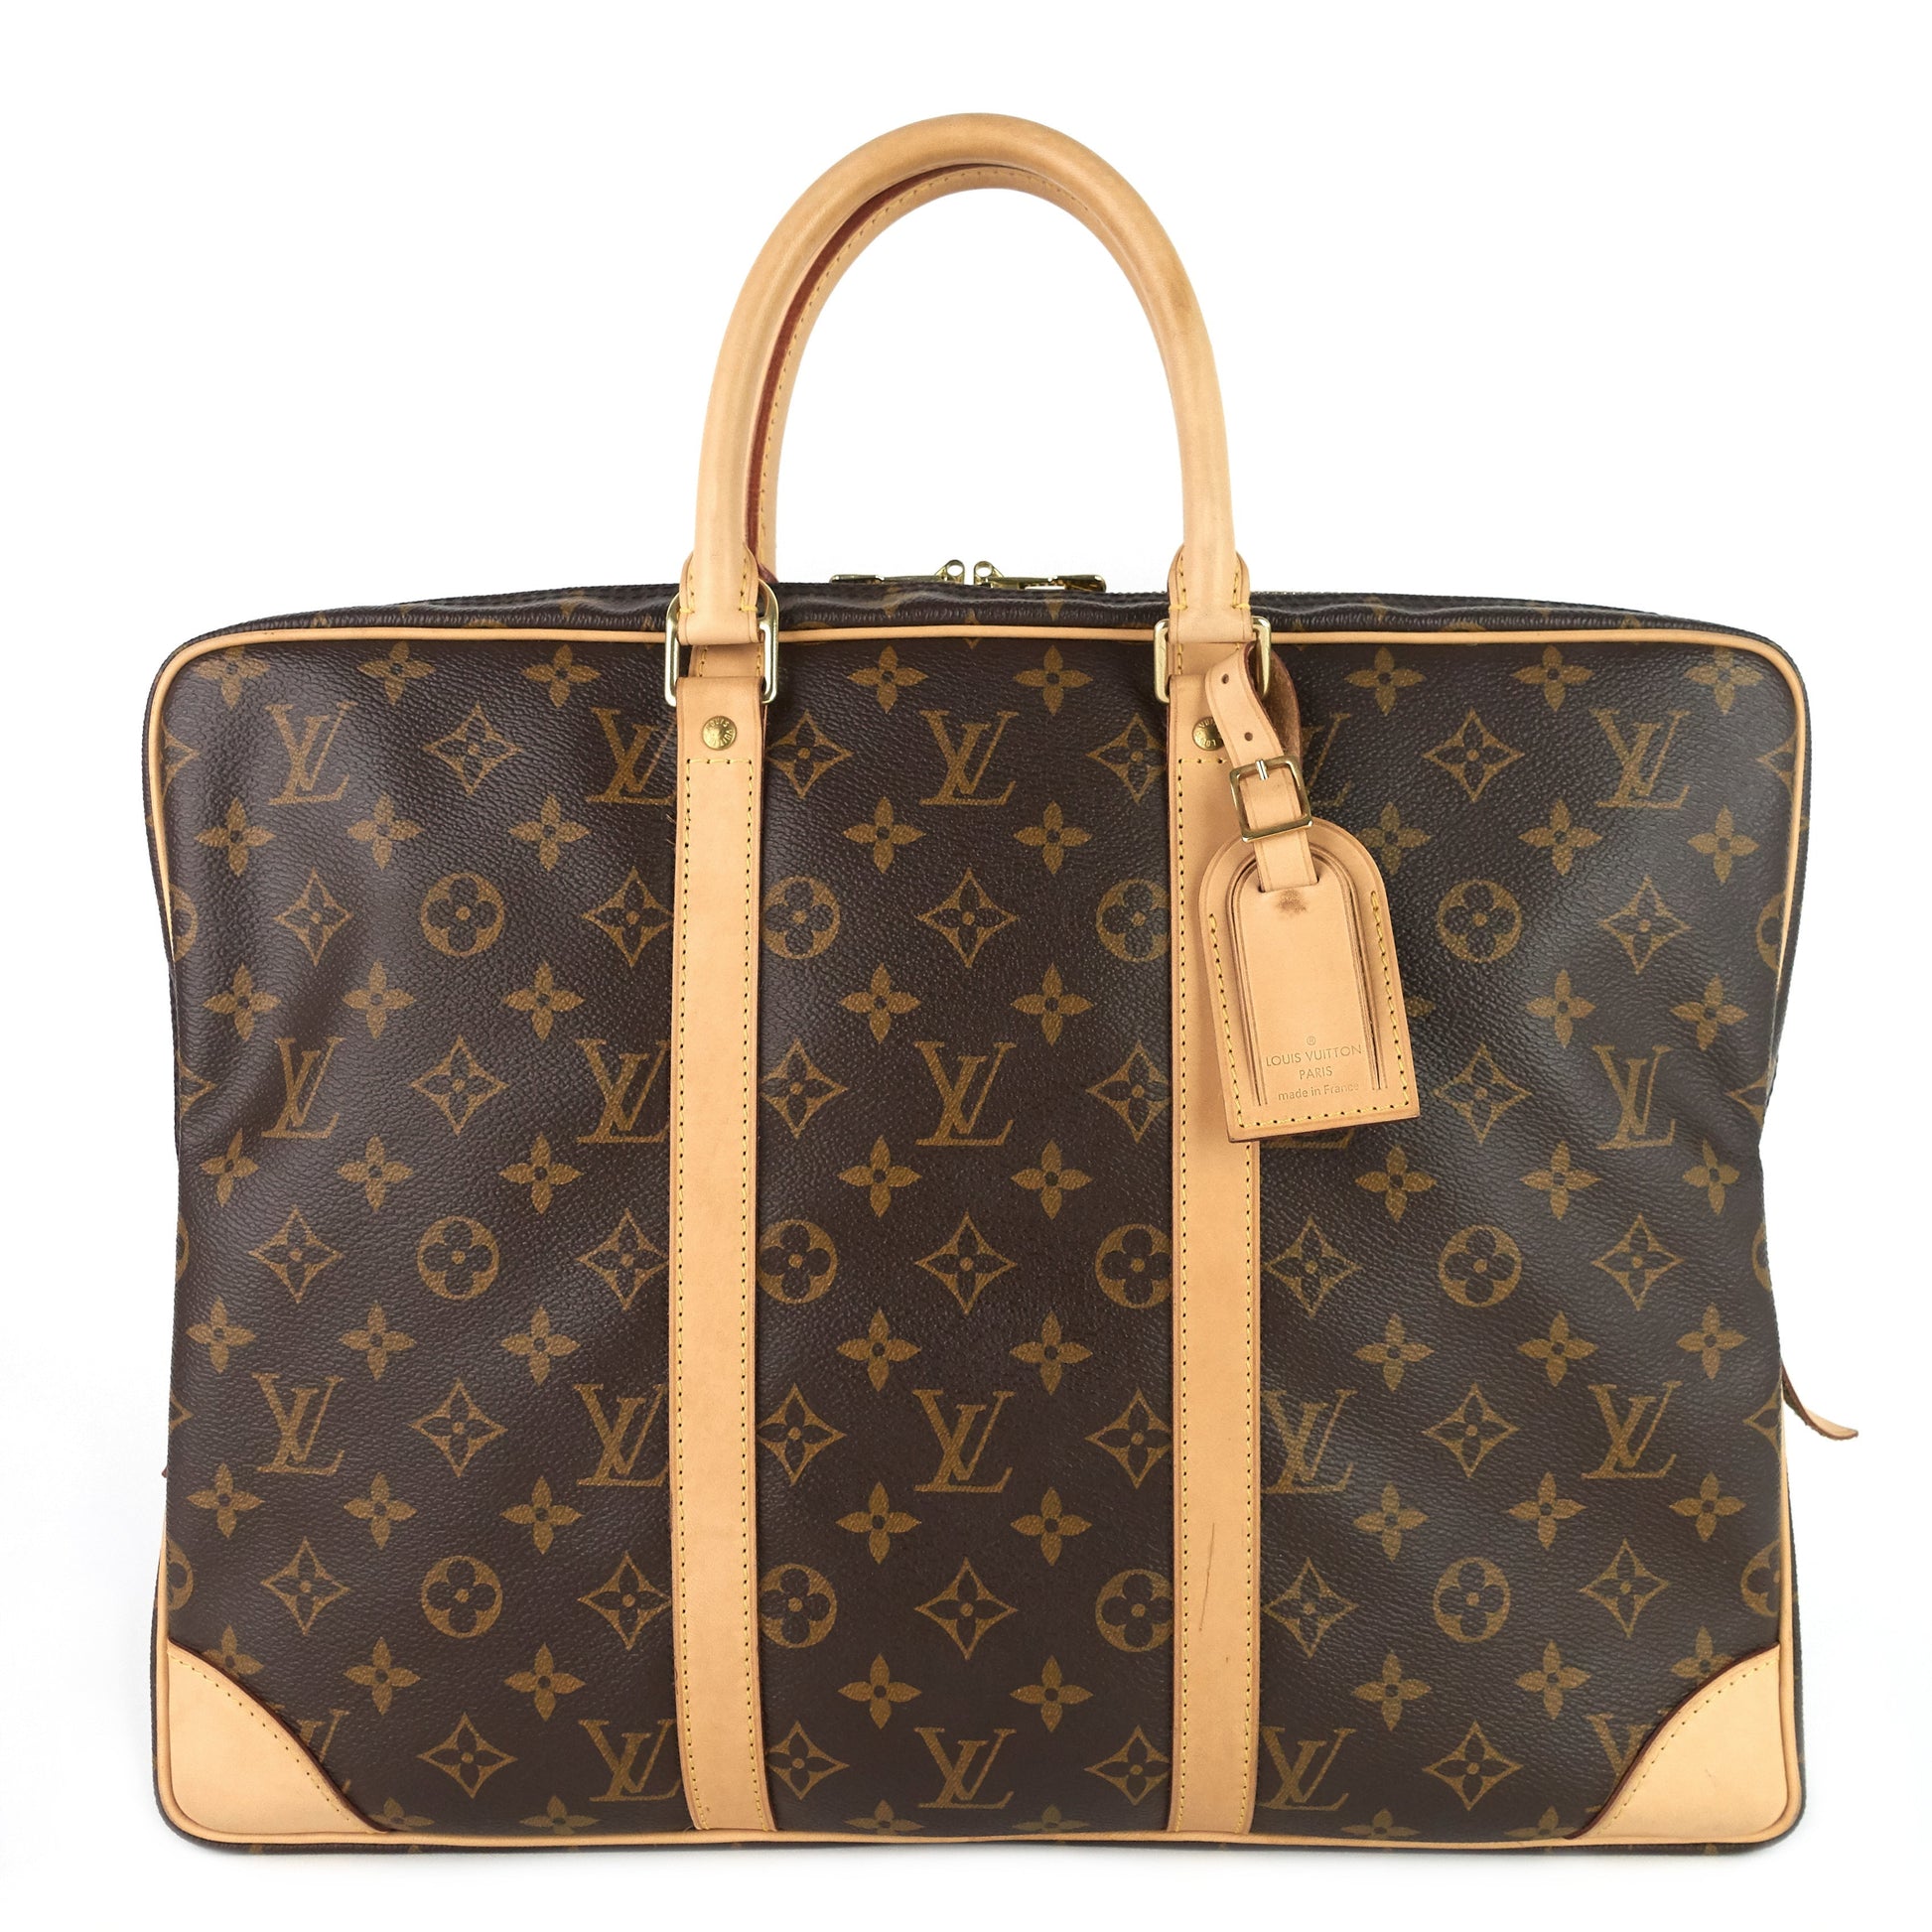 16 LOUIS VUITTON HANDBAGS THAT ARE WORTH IT *Buy These Instead*